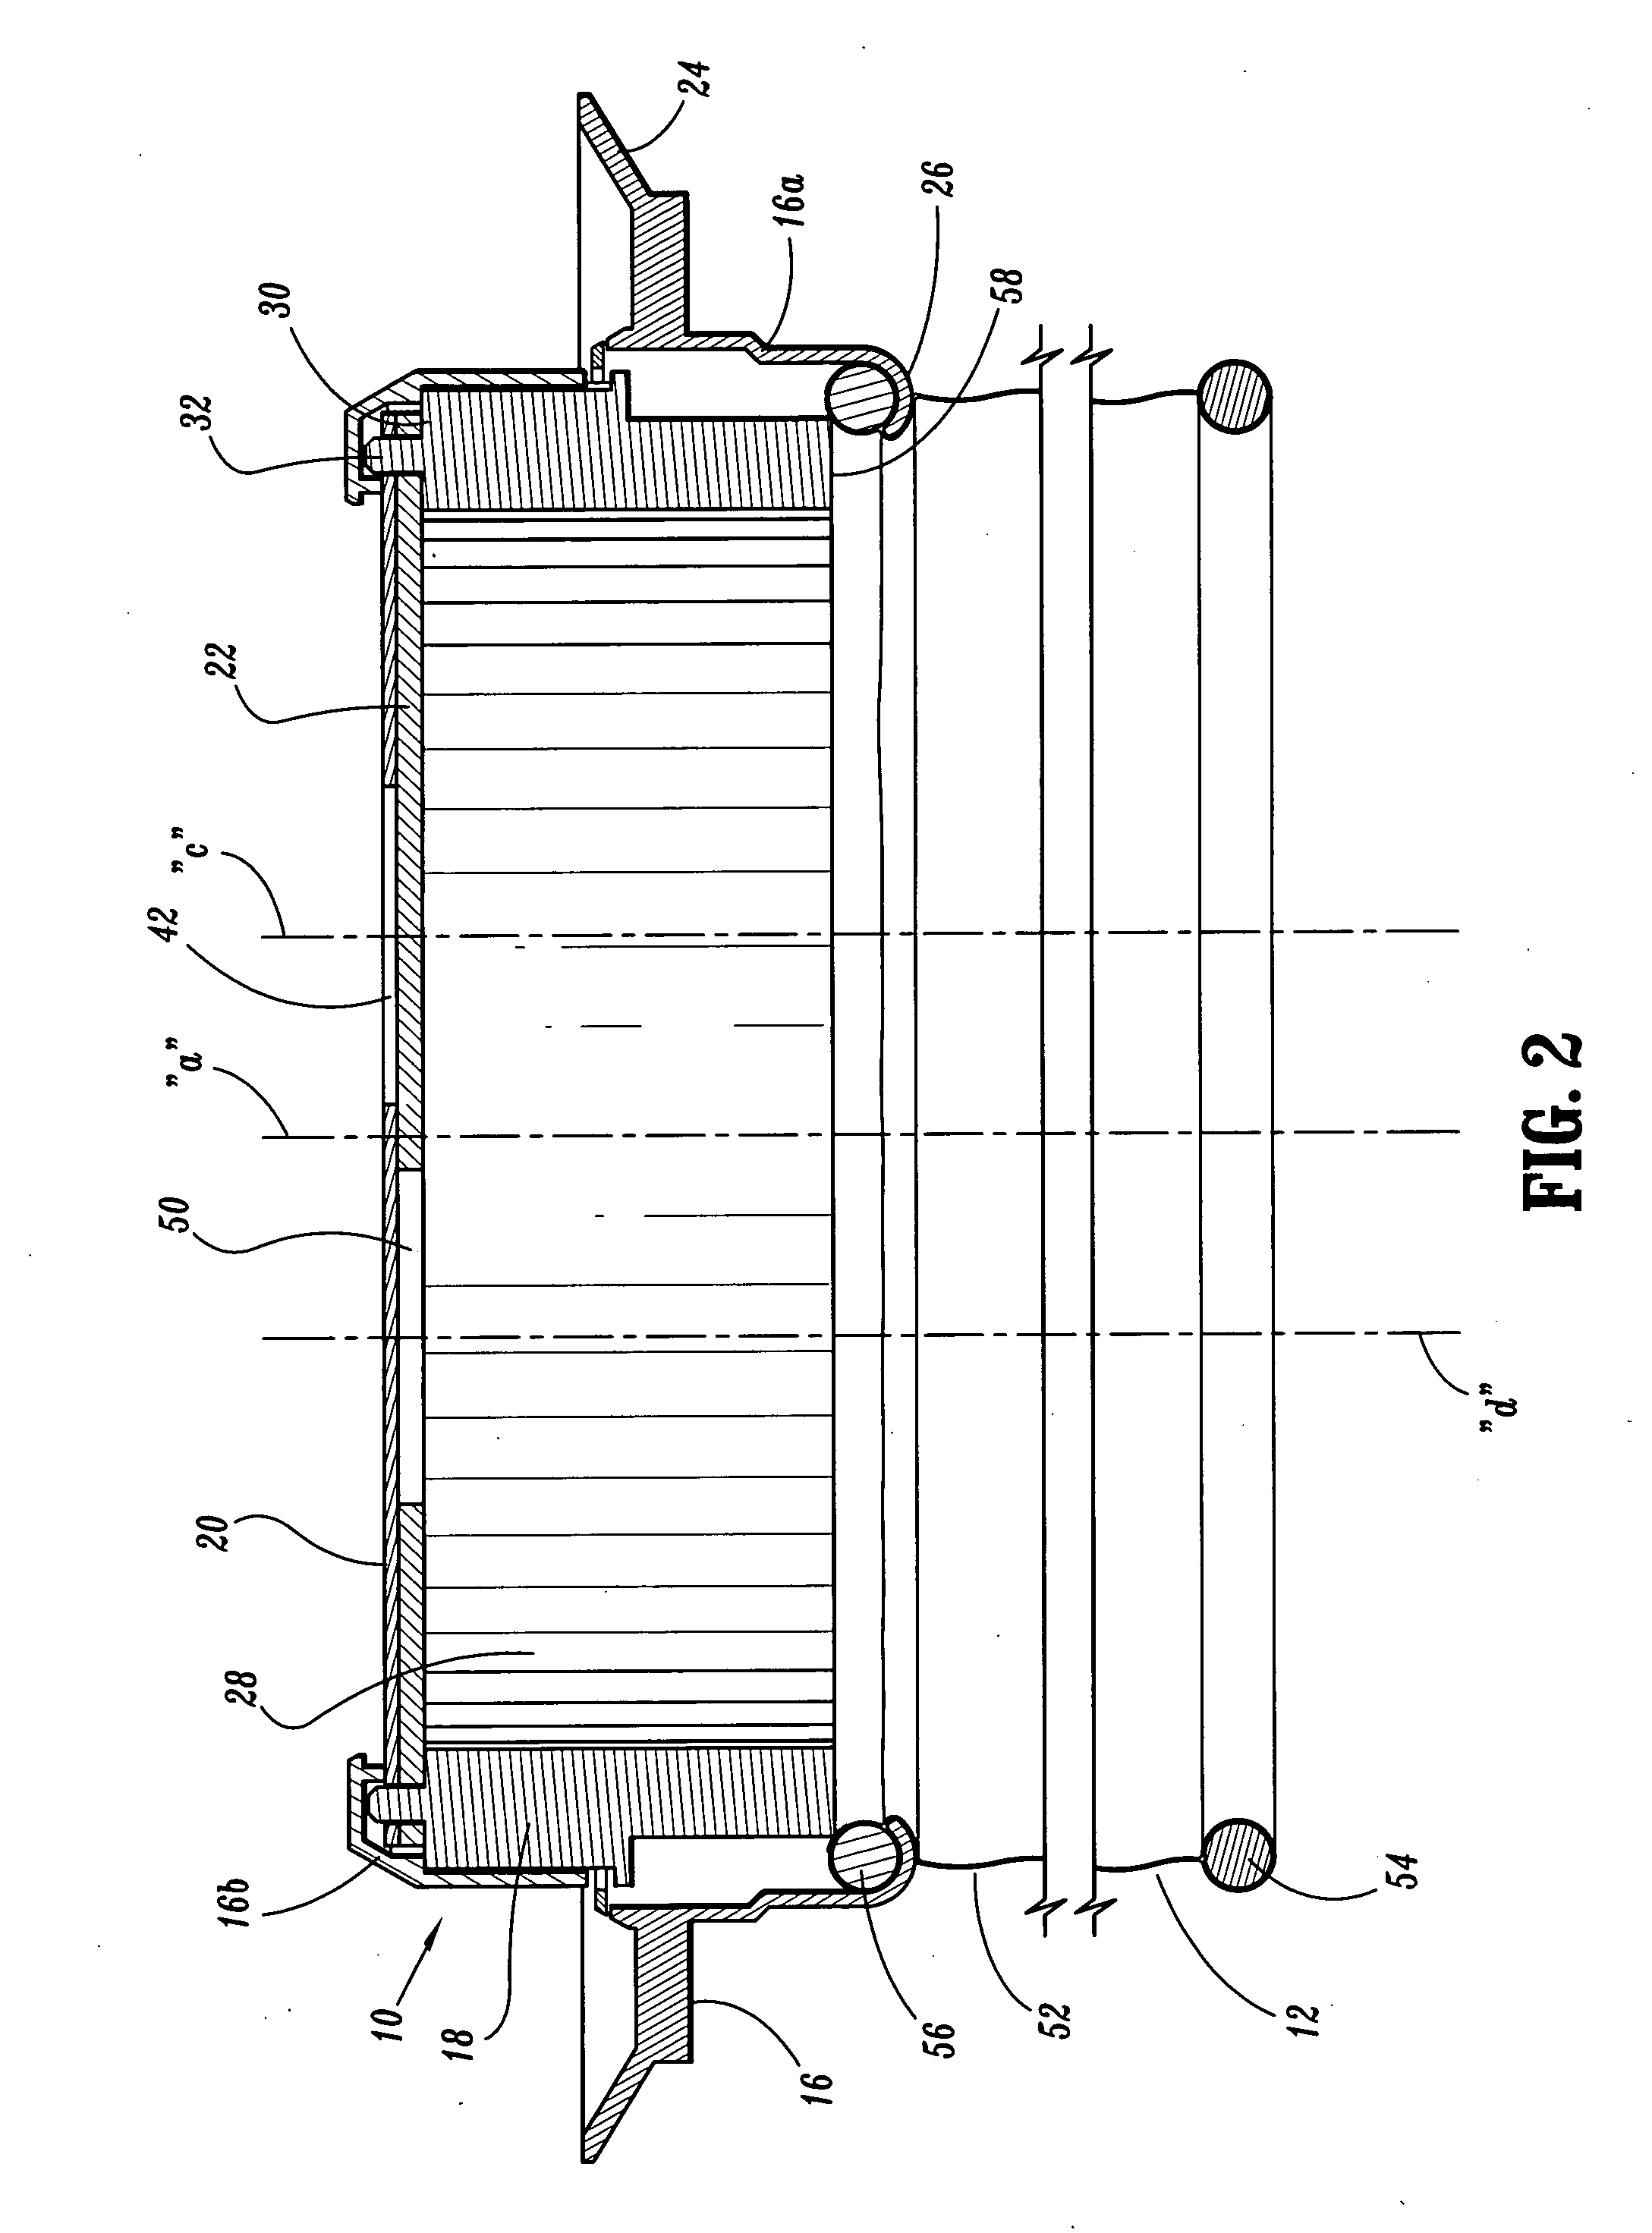 Surgical hand access apparatus